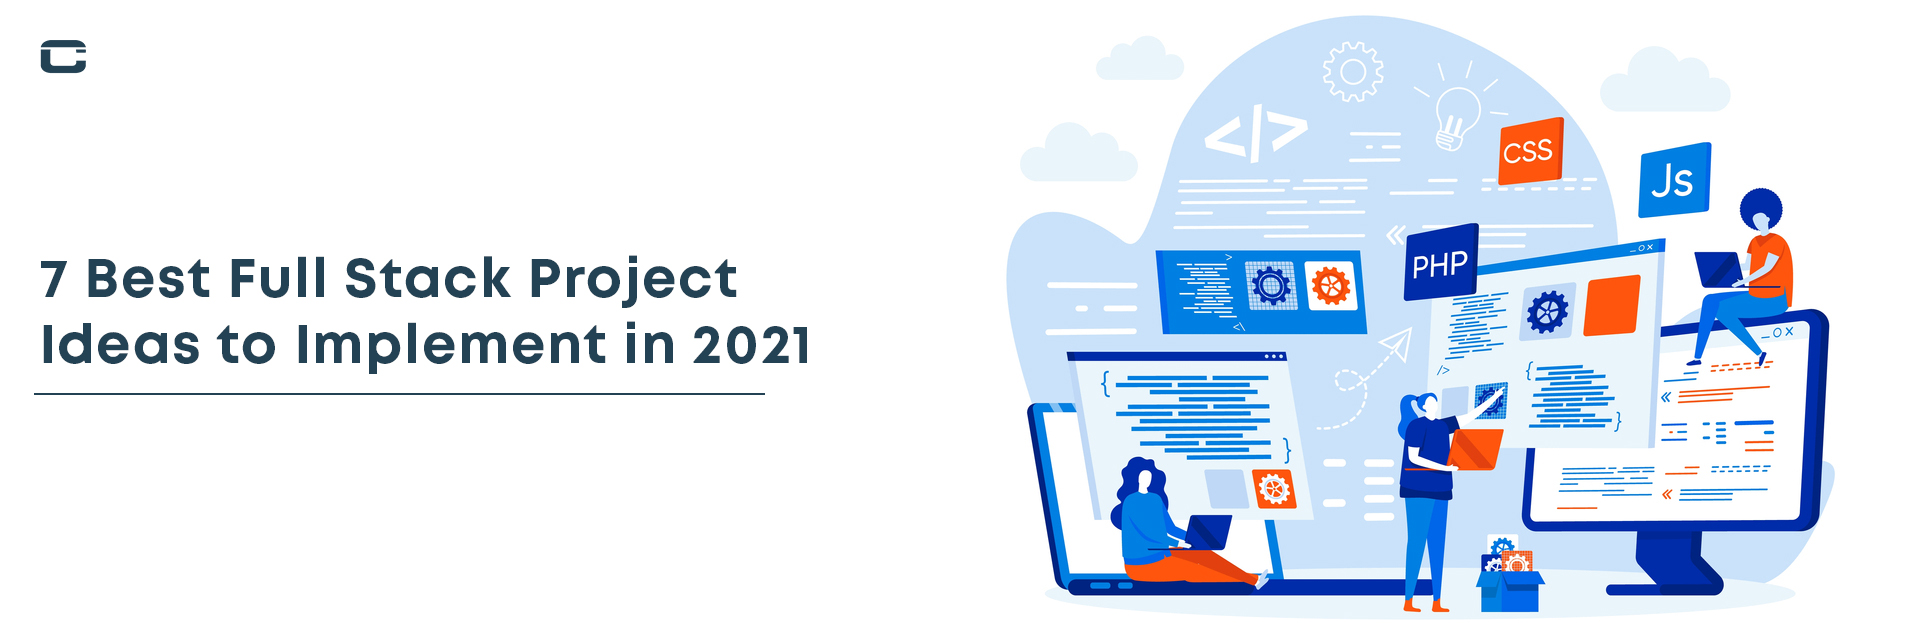 7 Best Full Stack Project Ideas to Implement in 2021